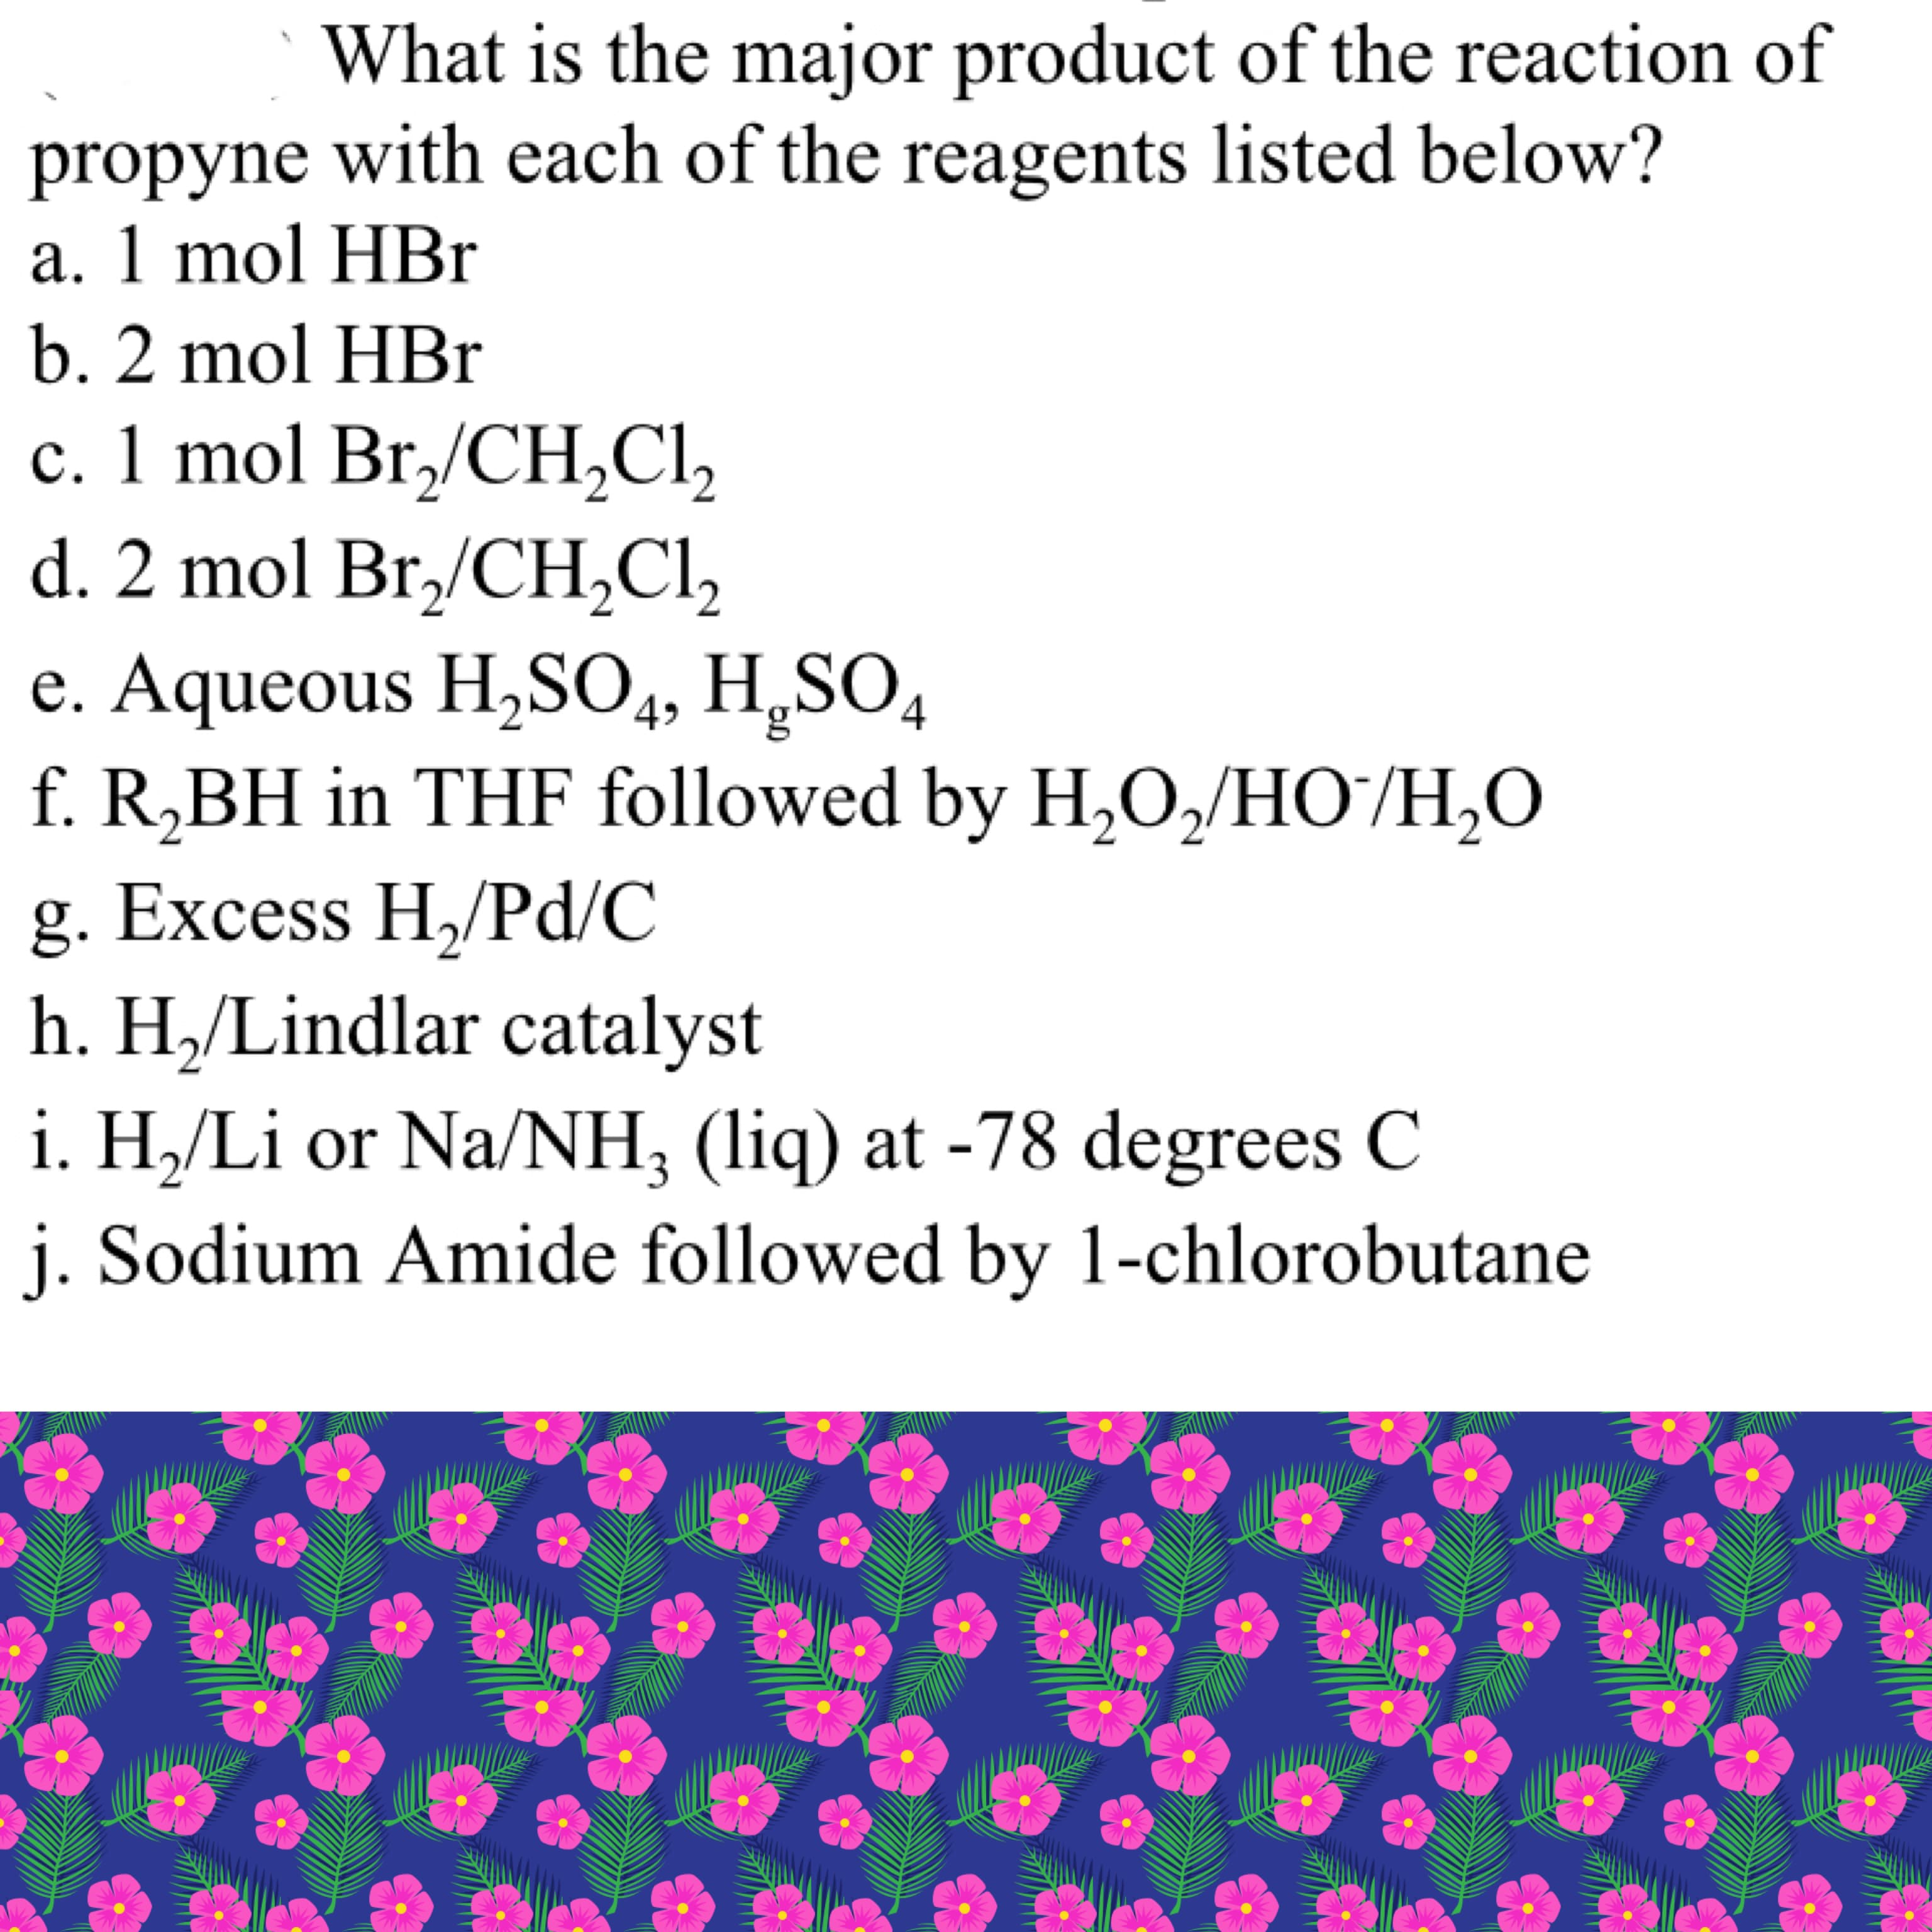 What is the major product of the reaction of
propyne with each of the reagents listed below?
a. 1 mol HBr
b. 2 mol HBr
c. 1 mol Br,/CH,CI,
d. 2 mol Br,/CH,Cl,
e. Aqueous H,SO4, H,SO,
f. R,BH in THF followed by H,O,/HO/H,O
g. Excess H,/Pd/C
h. H,/Lindlar catalyst
i. H,/Li or Na/NH, (liq) at -78 degrees C
j. Sodium Amide followed by 1-chlorobutane
